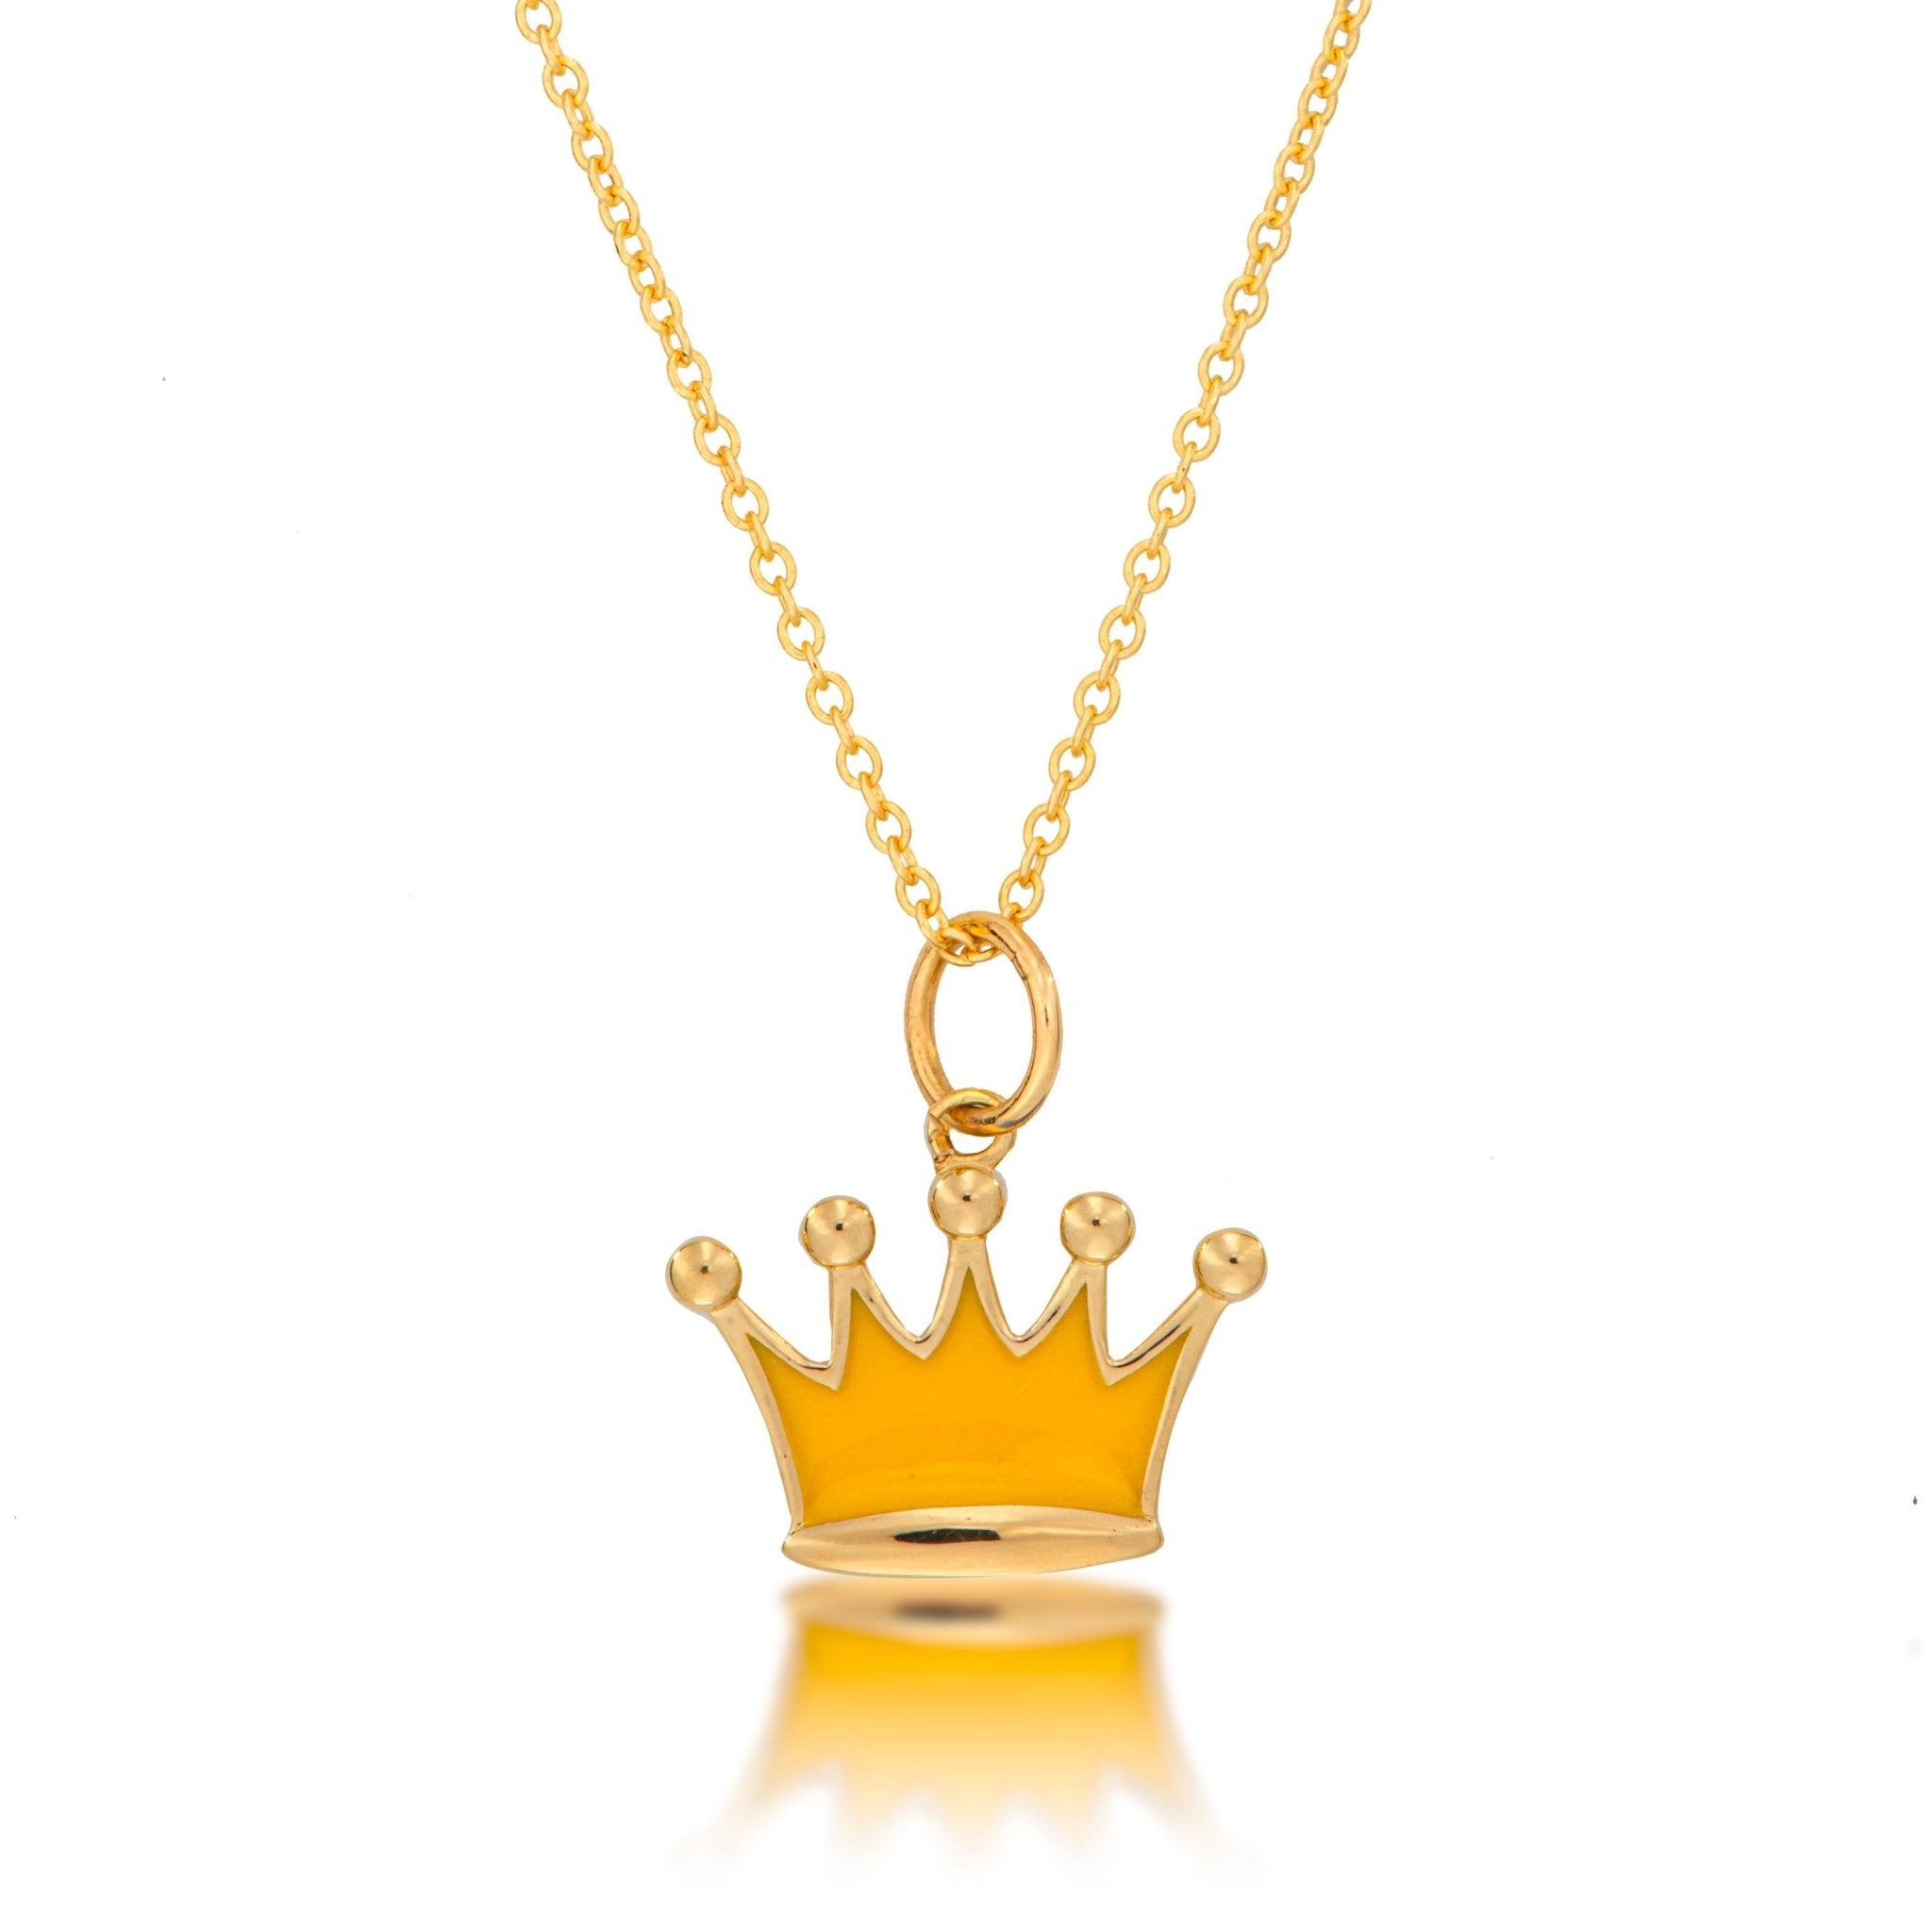 Gold Crown Pendant Necklace - Alexis Jae Jewelry